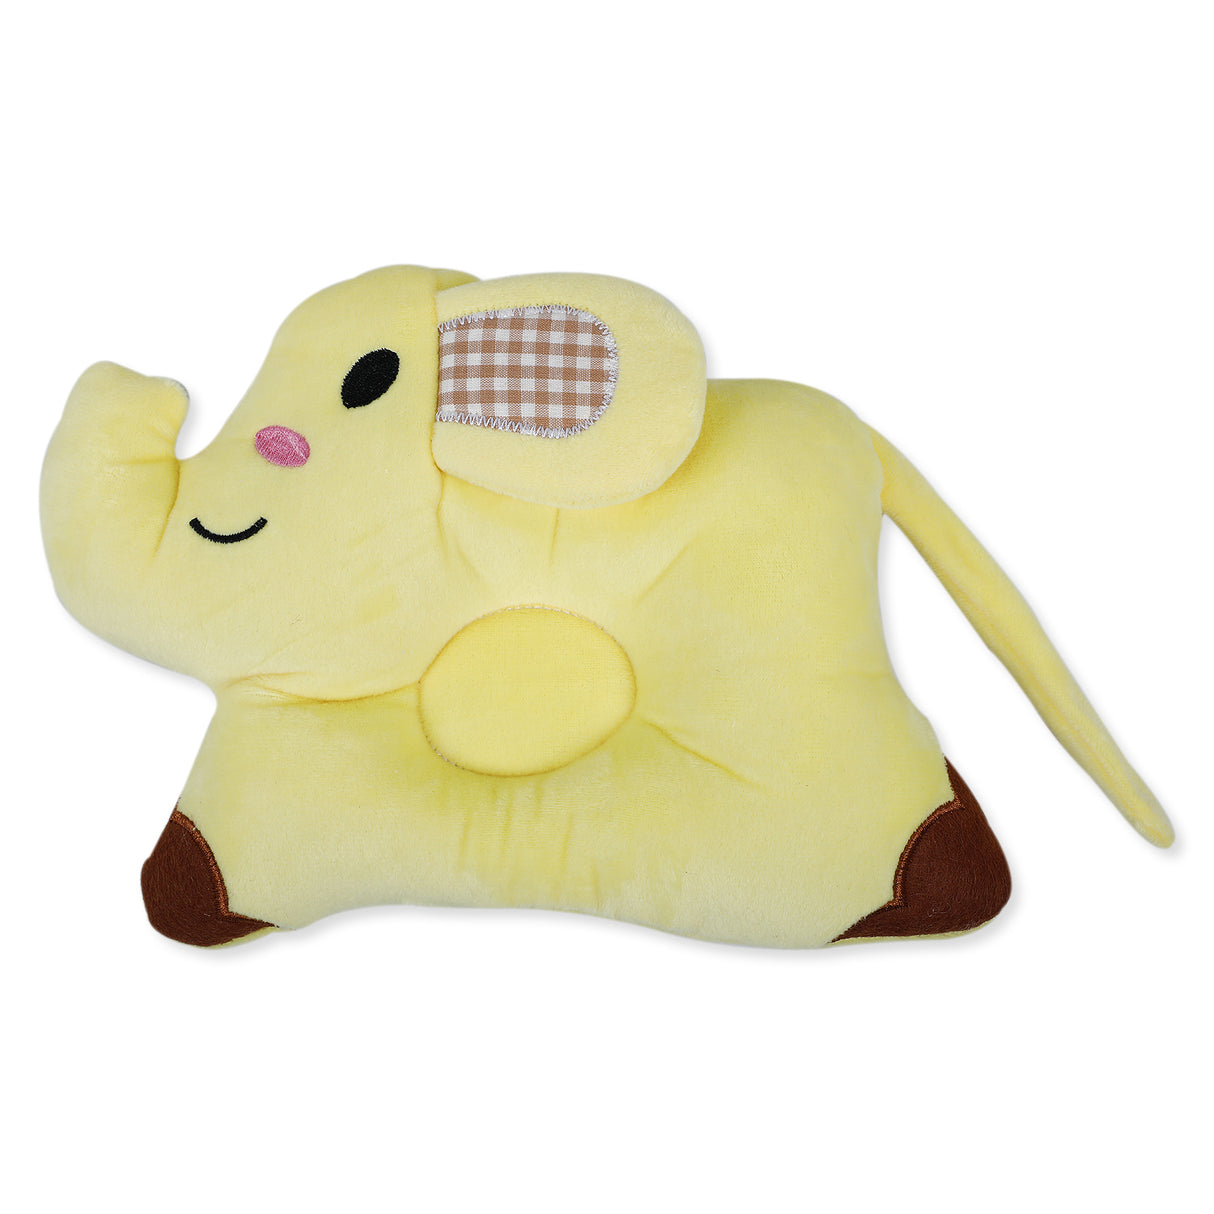 Elephant Playful Soft And Cozy Pillow